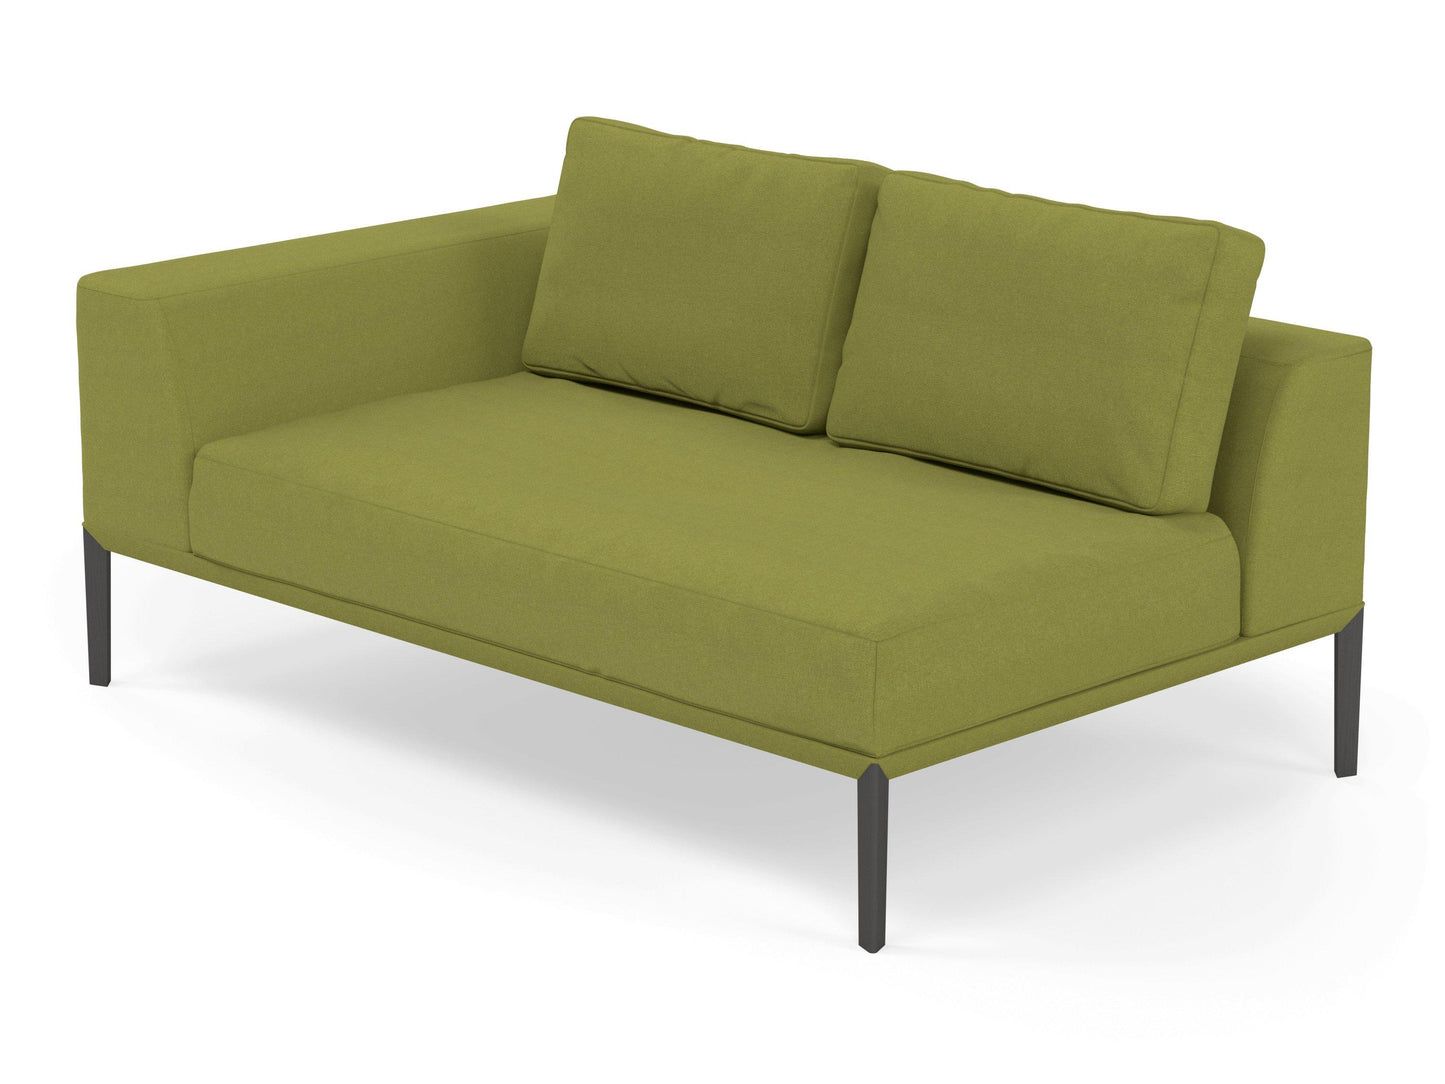 Modern 2 Seater Chaise Lounge Style Sofa with Right Armrest in Lime Green Fabric-Distinct Designs (London) Ltd